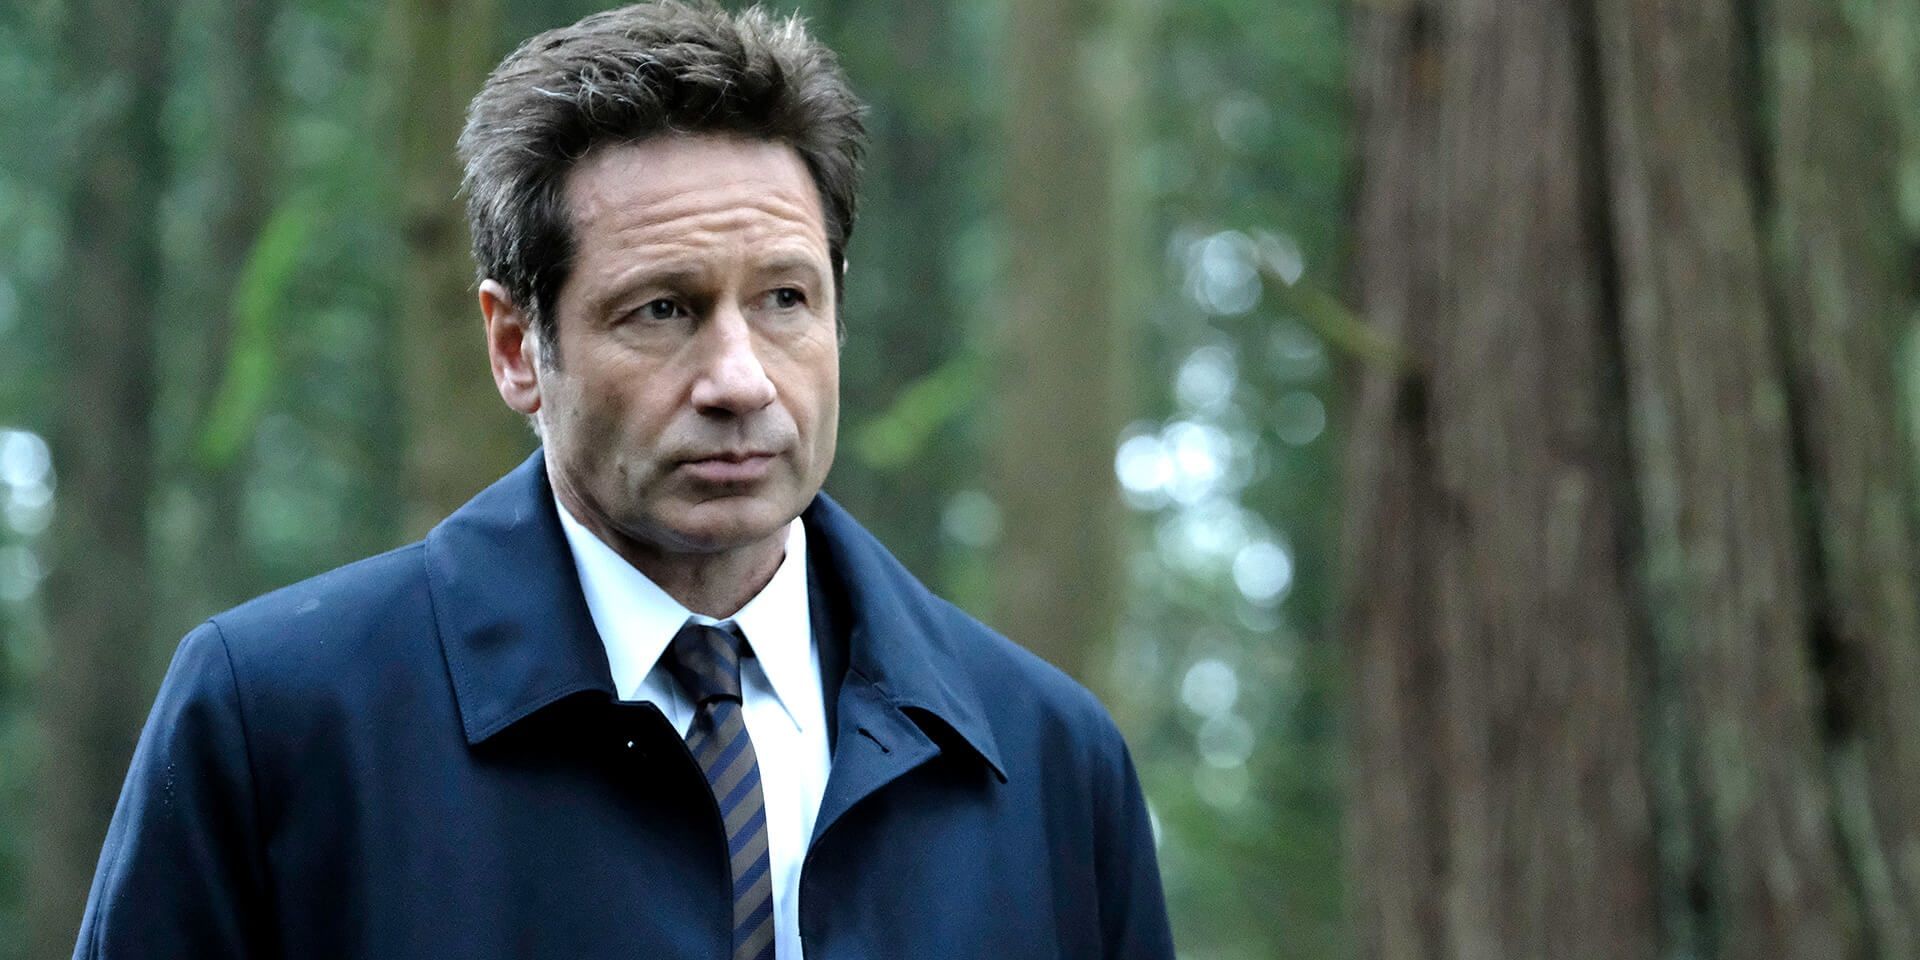 David Duchovny in The X-Files